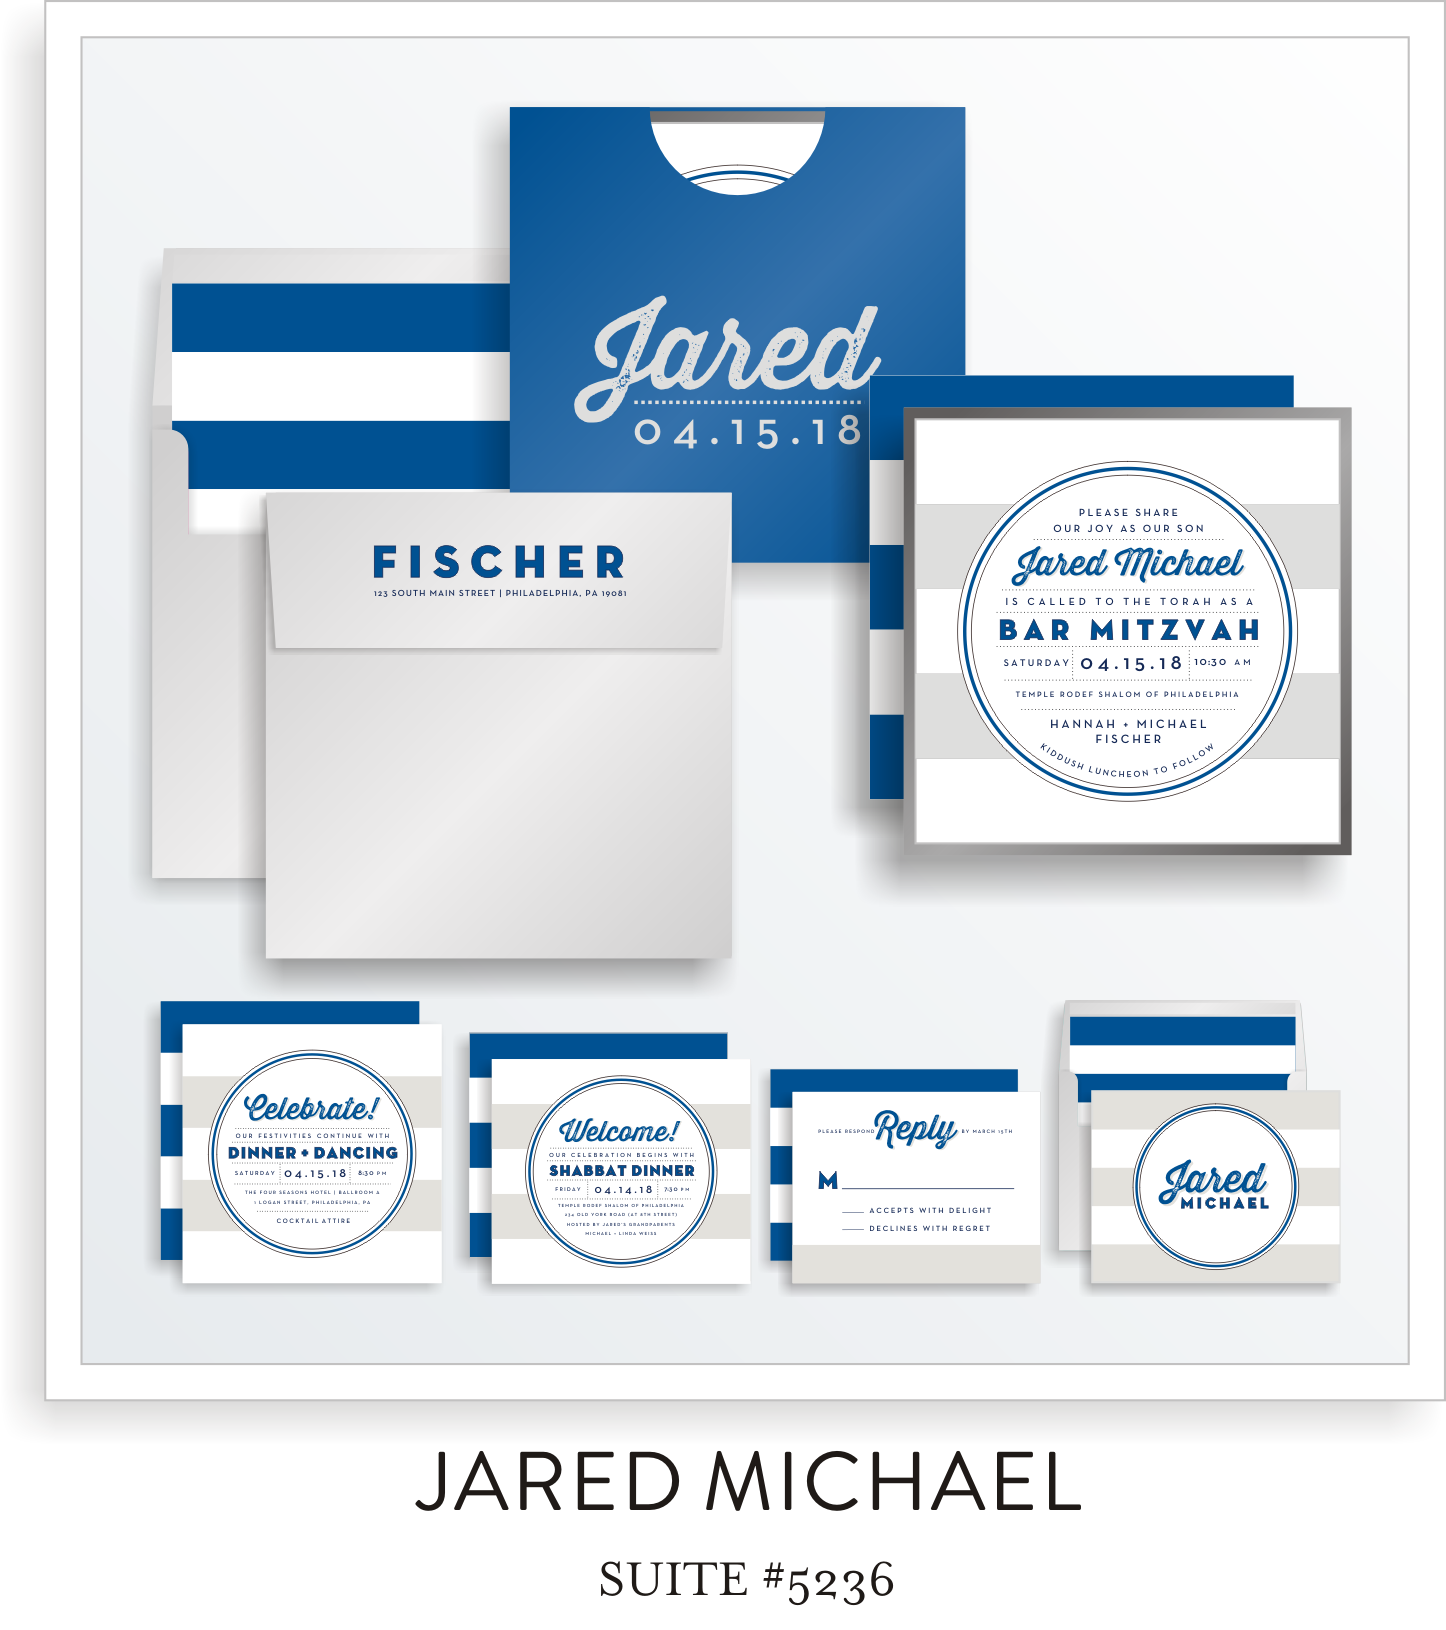 Copy of Copy of <a href=/bar-mitzvah-invitations-5236>Suite Details→</a><strong><a href=/jared-michael-in-colors>see more colors→</a></strong>